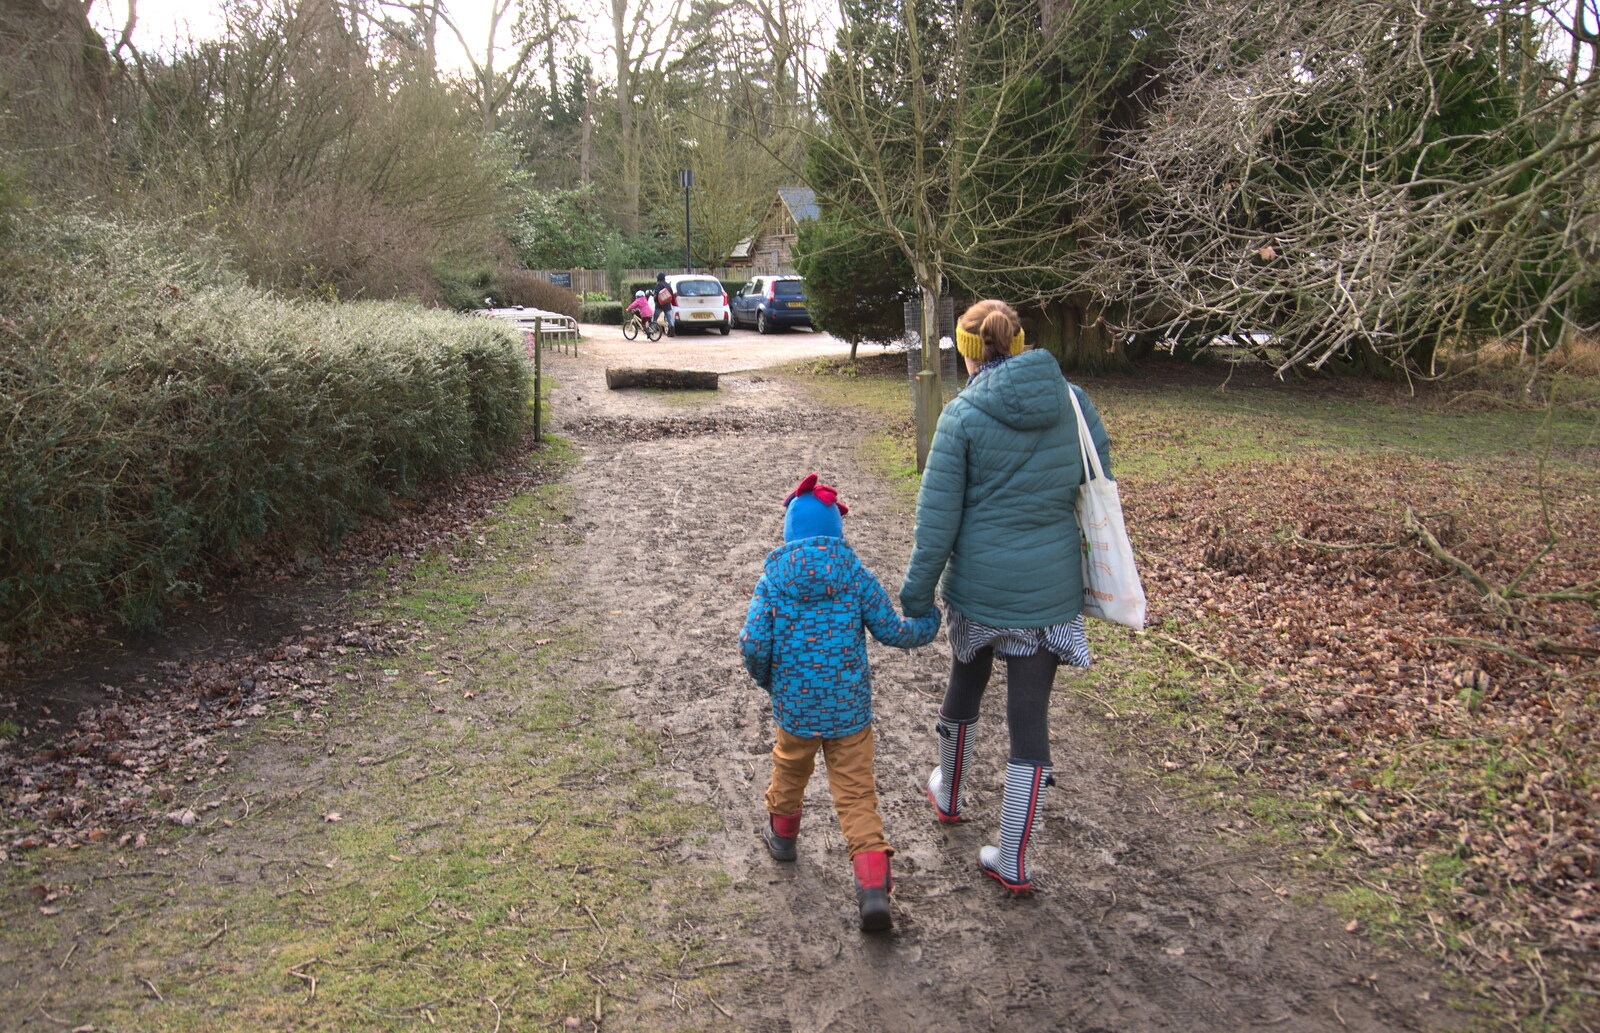 Harry and Isobel on a muddy path from Life Below Stairs, Ickworth House, Horringer, Suffolk - 28th January 2018